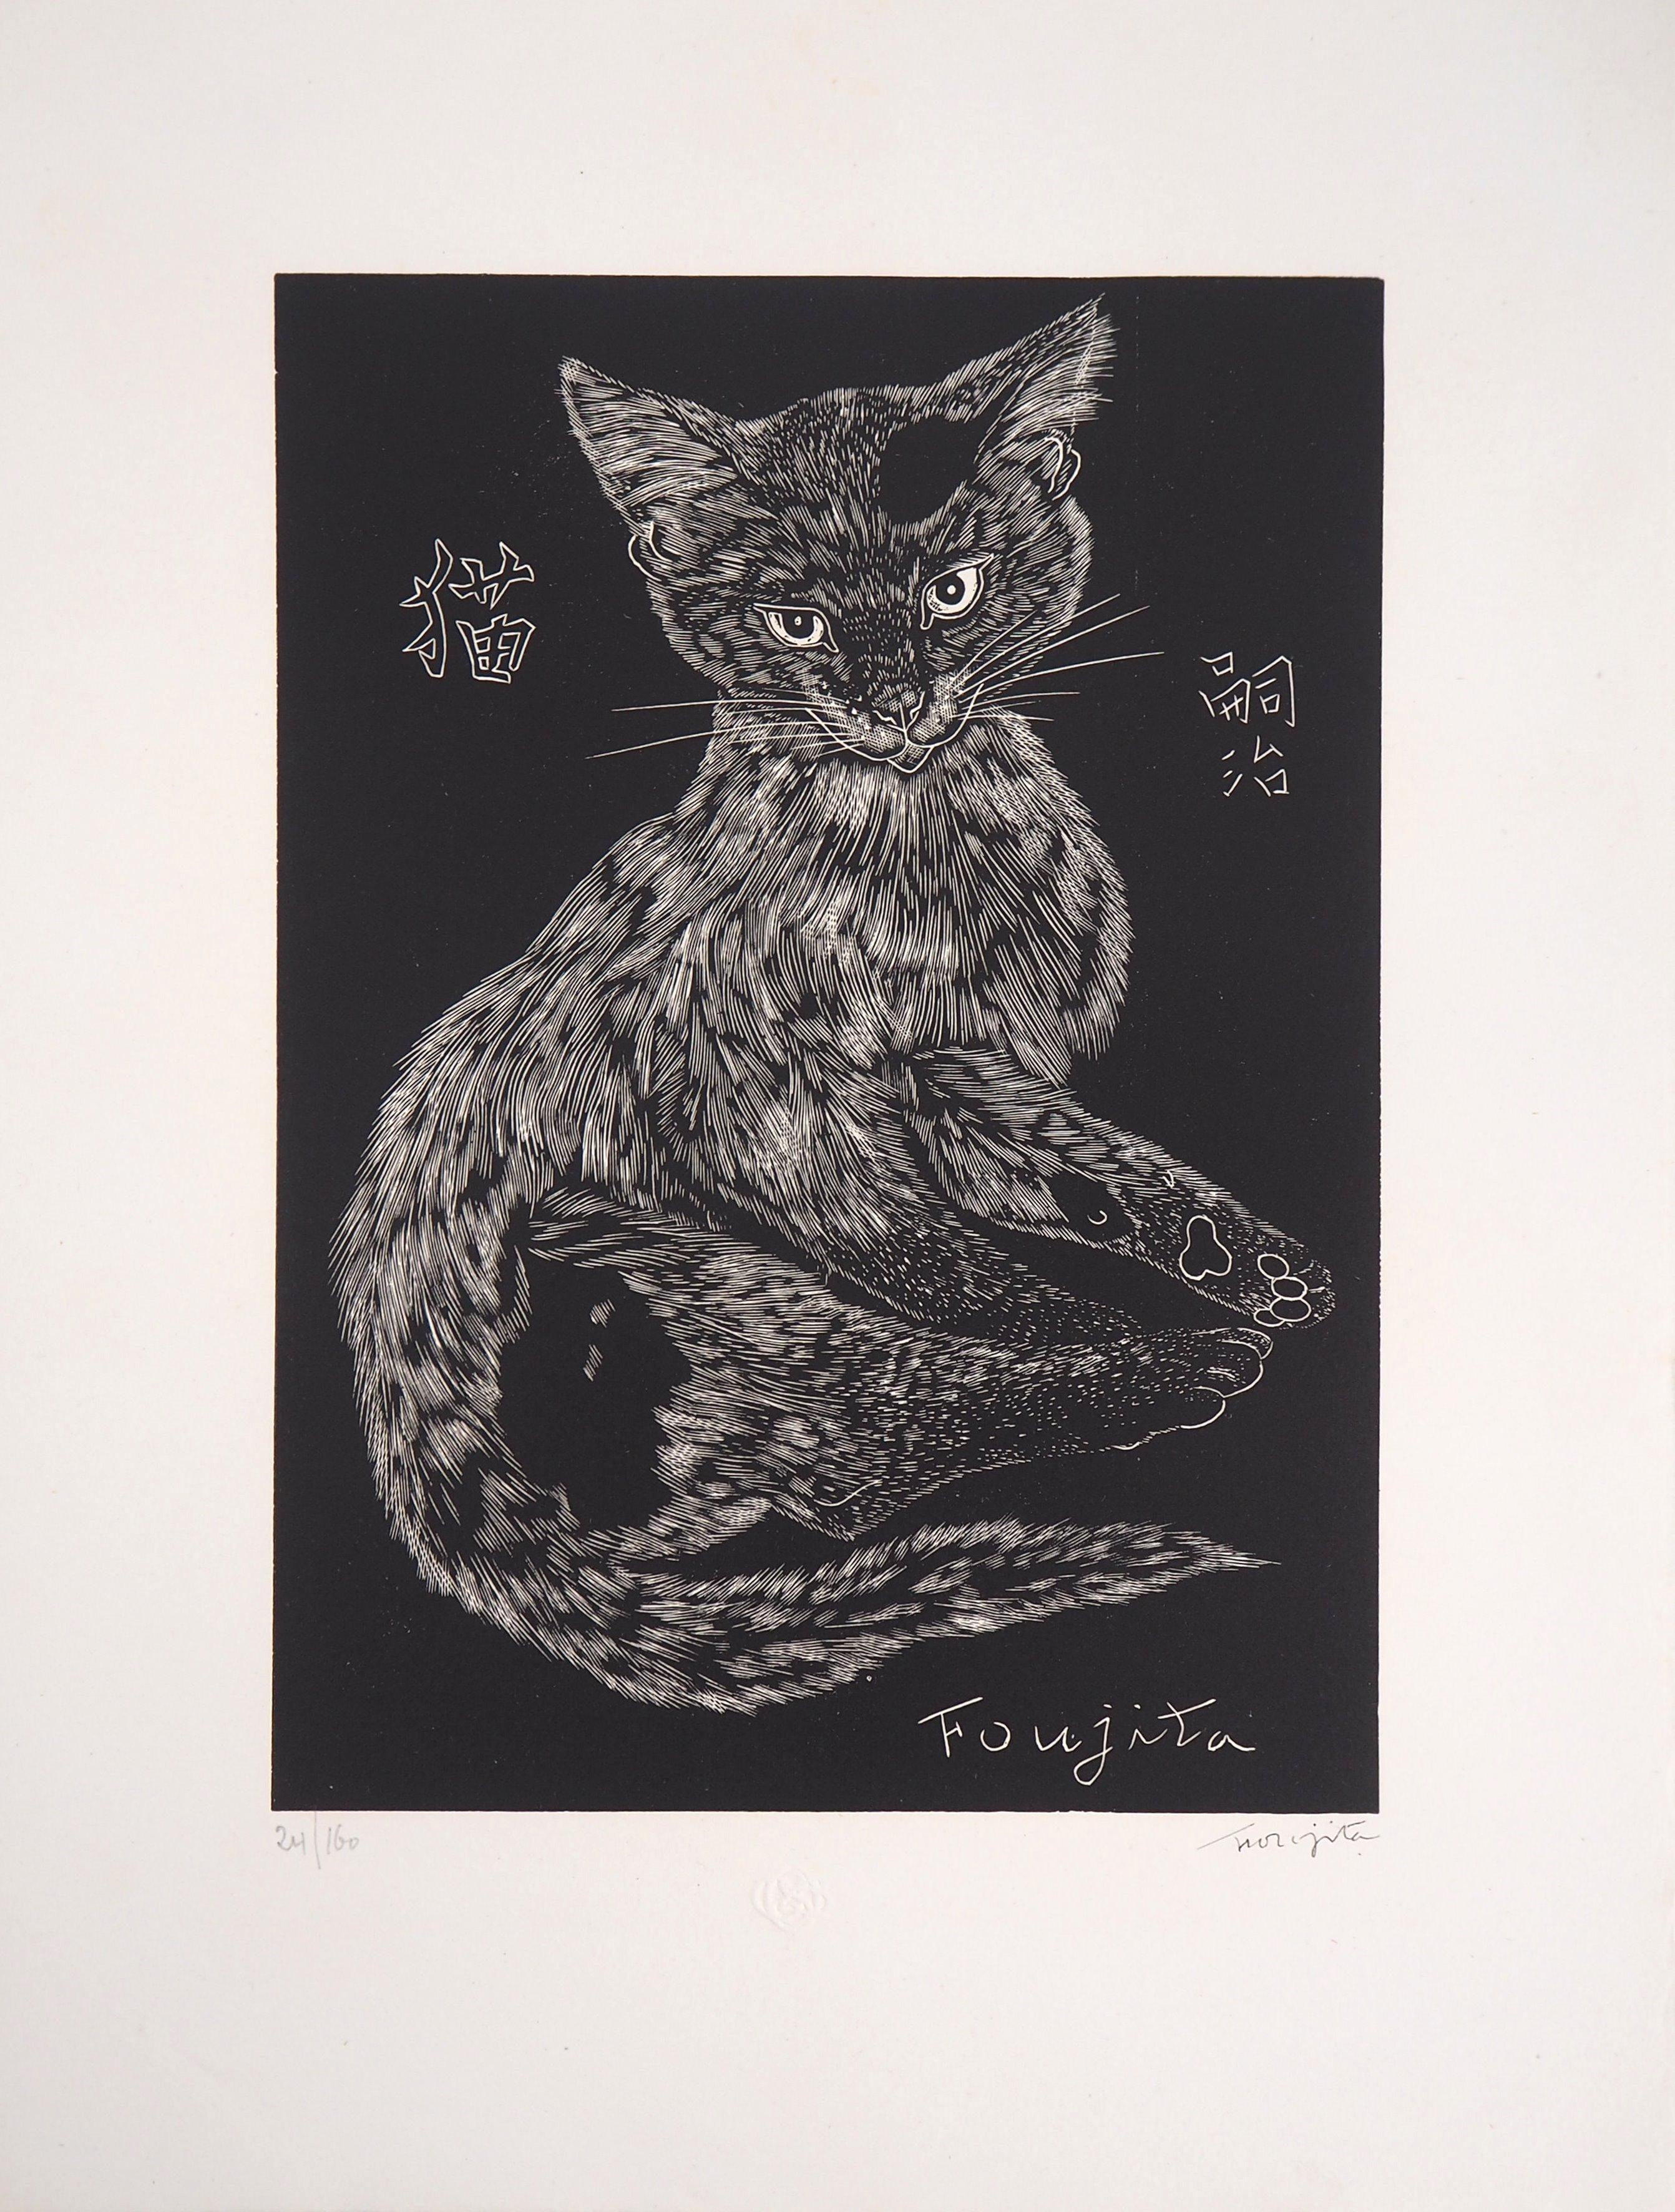 Leonard Tsuguharu FOUJITA
Cat, 1927

Original woodcut
Handsigned with ink
Numbered /160
Bears the blind stamp of the editor (Lugt 1140a)
On Vellum 32.5 x 25.5 cm (c. 13 x 10 inch)

REFERENCES : Catalogue raisonné : Buisson #27-03

Excellent